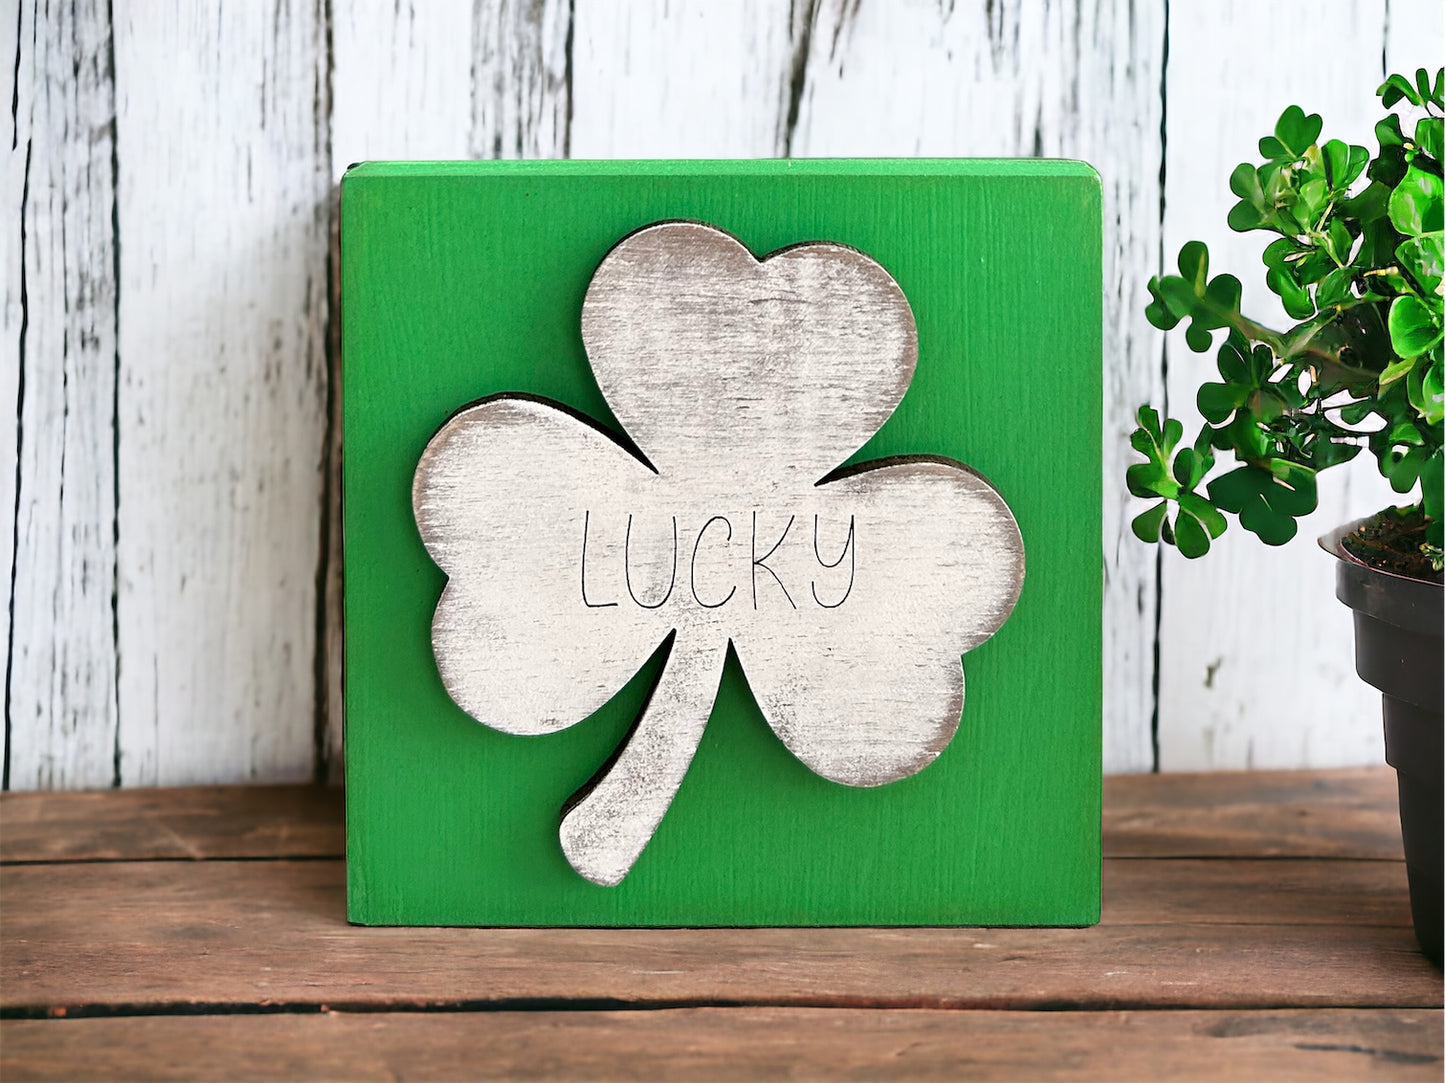 Rustic/Farmhouse Engraved “Lucky” Clover Wood Block Sign